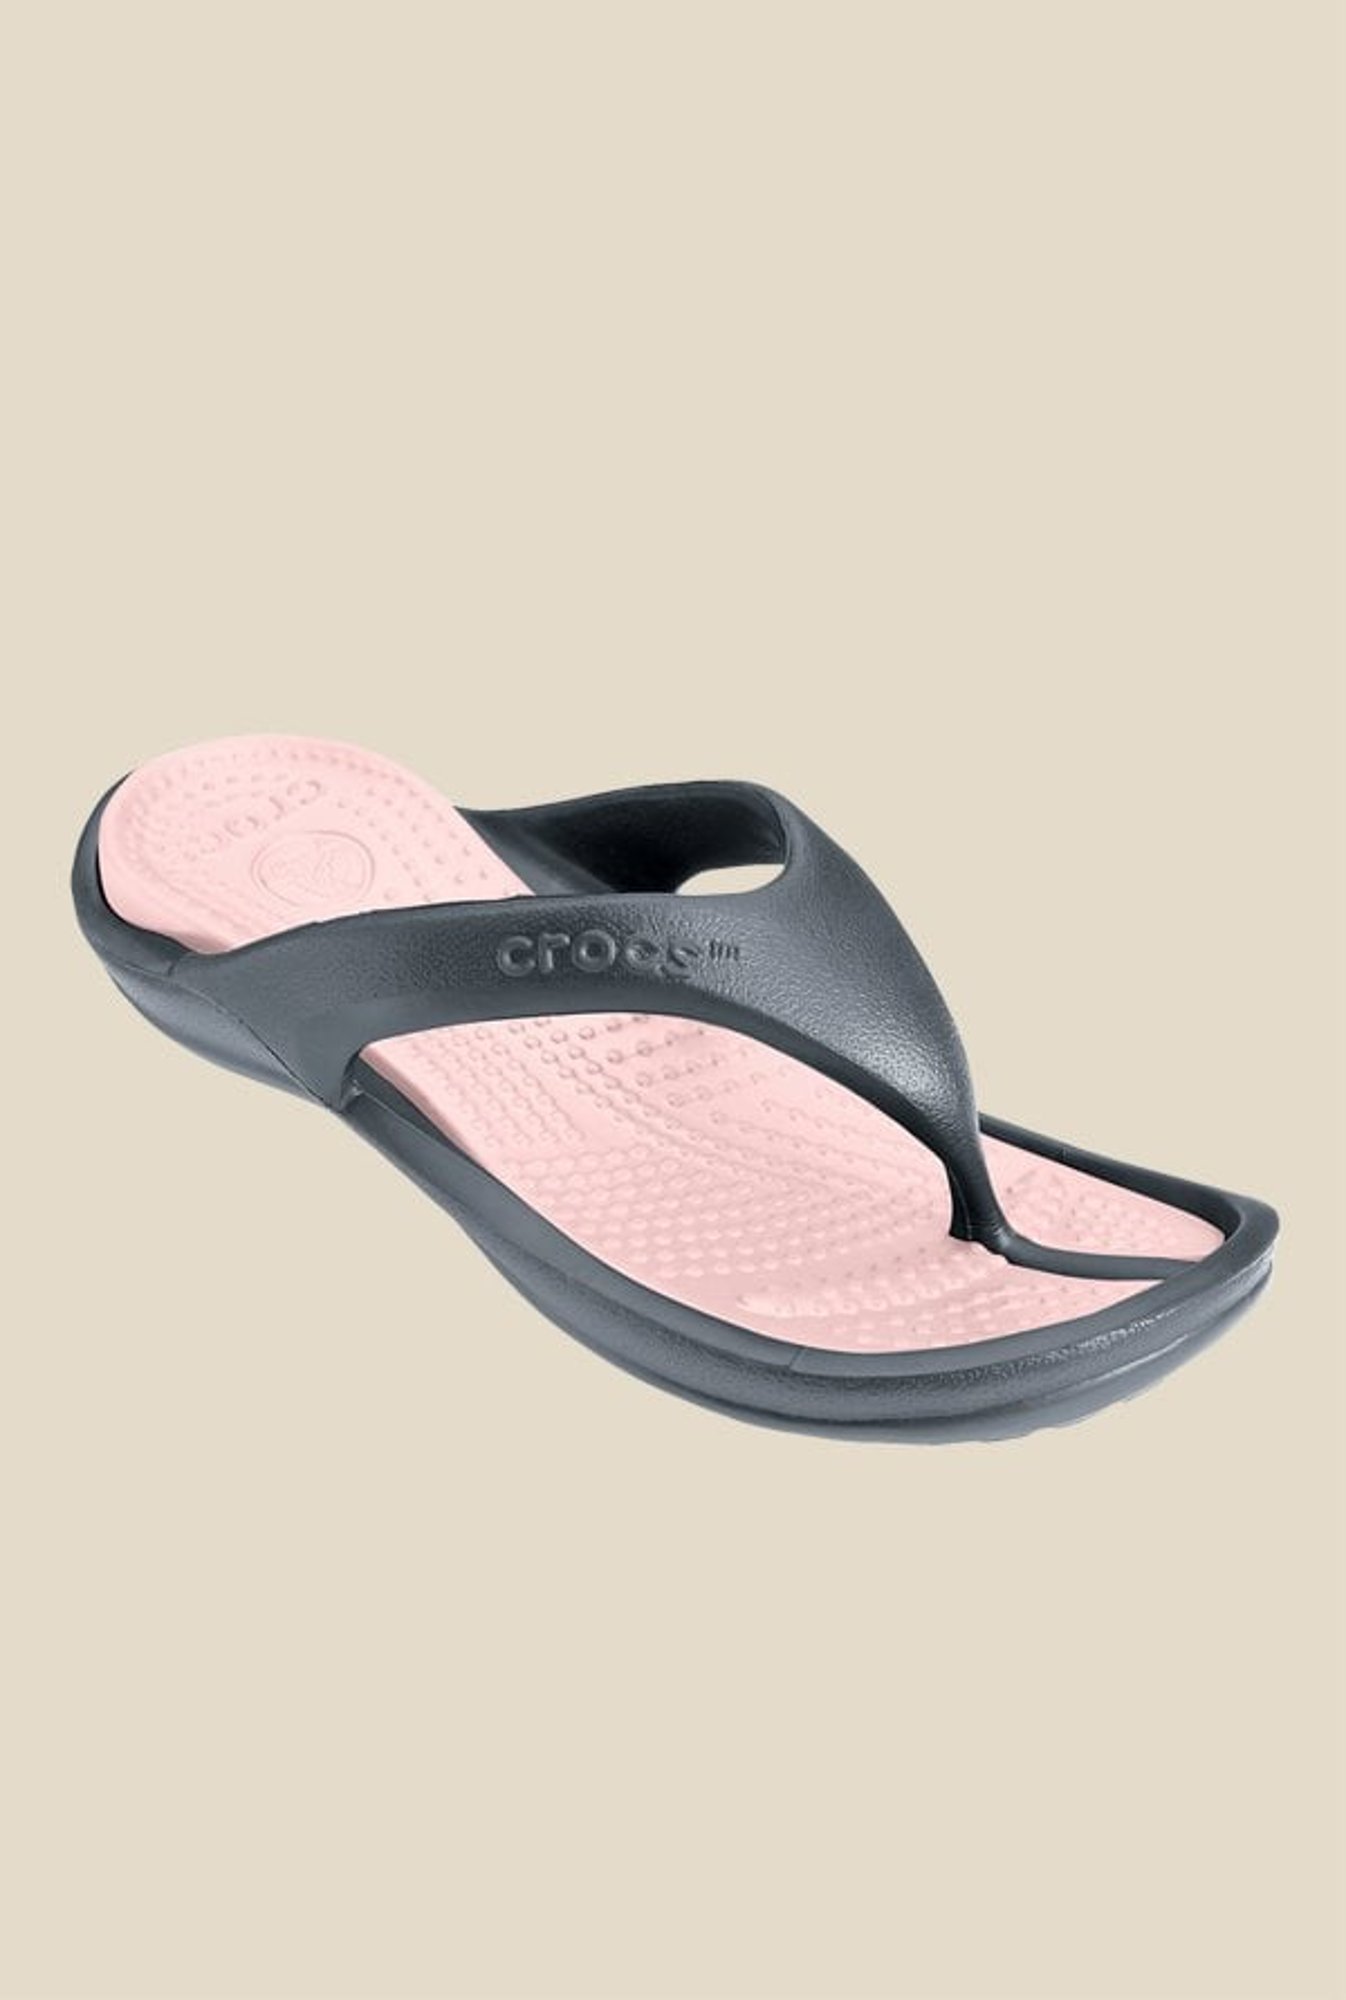 lugt Regnskab Metafor Buy Crocs Athens II Charcoal Grey & Cotton Candy Flip Flops for Women at  Best Price @ Tata CLiQ